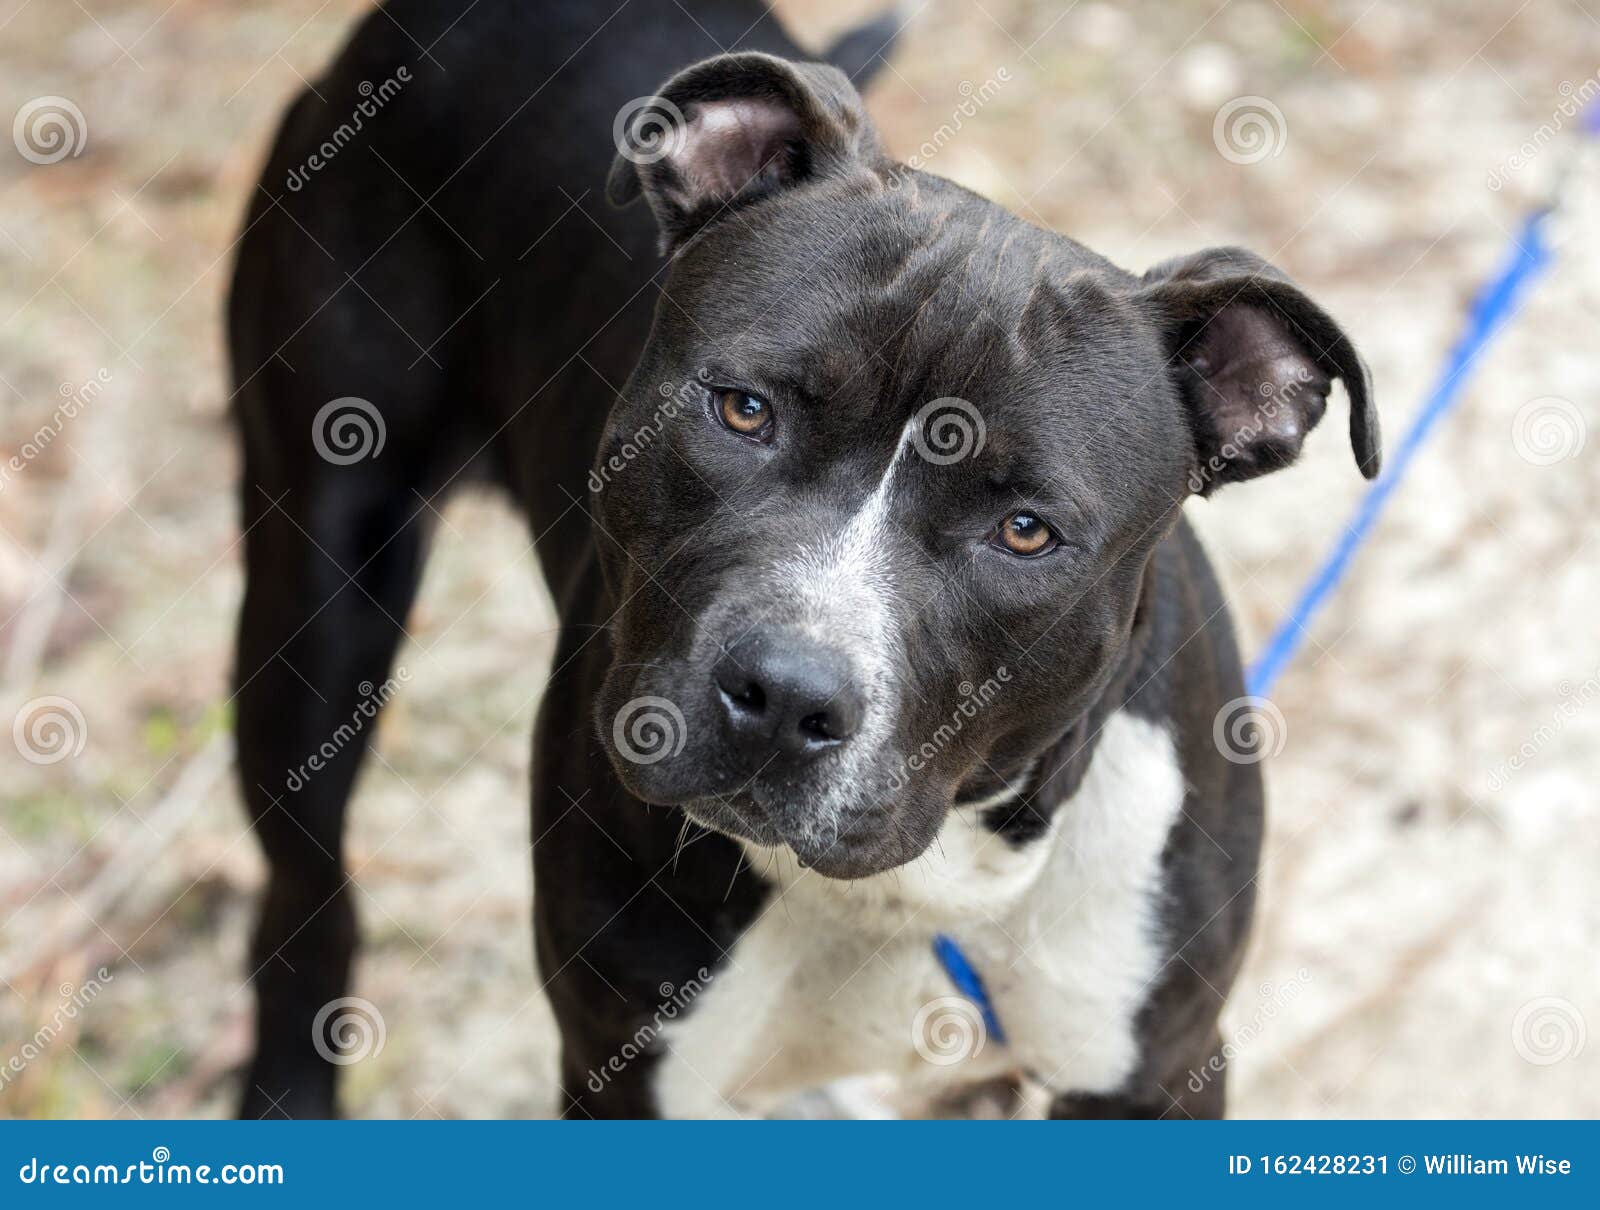 Young Black And White Pitbull Terrier Dog On Leash Wagging Tail Stock Image Image Of Terrier Bull 162428231